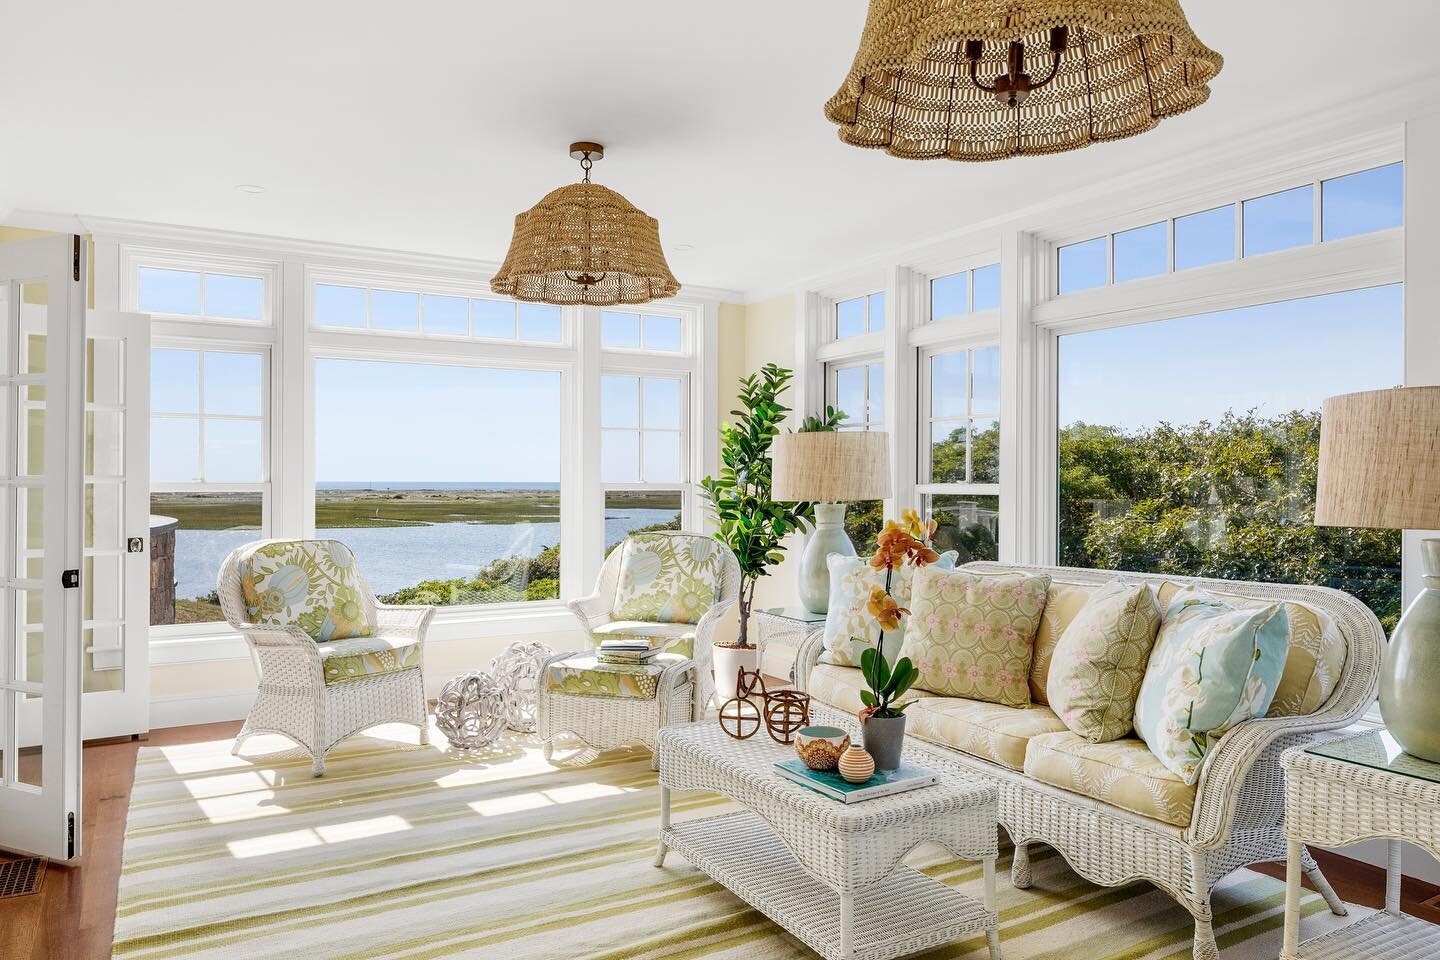 A classic sunroom is always a good idea...

Photography @gregpremru

#loveyourdigs #sunroomdecor #capecodstyle #capecodhomes #timelessdecor